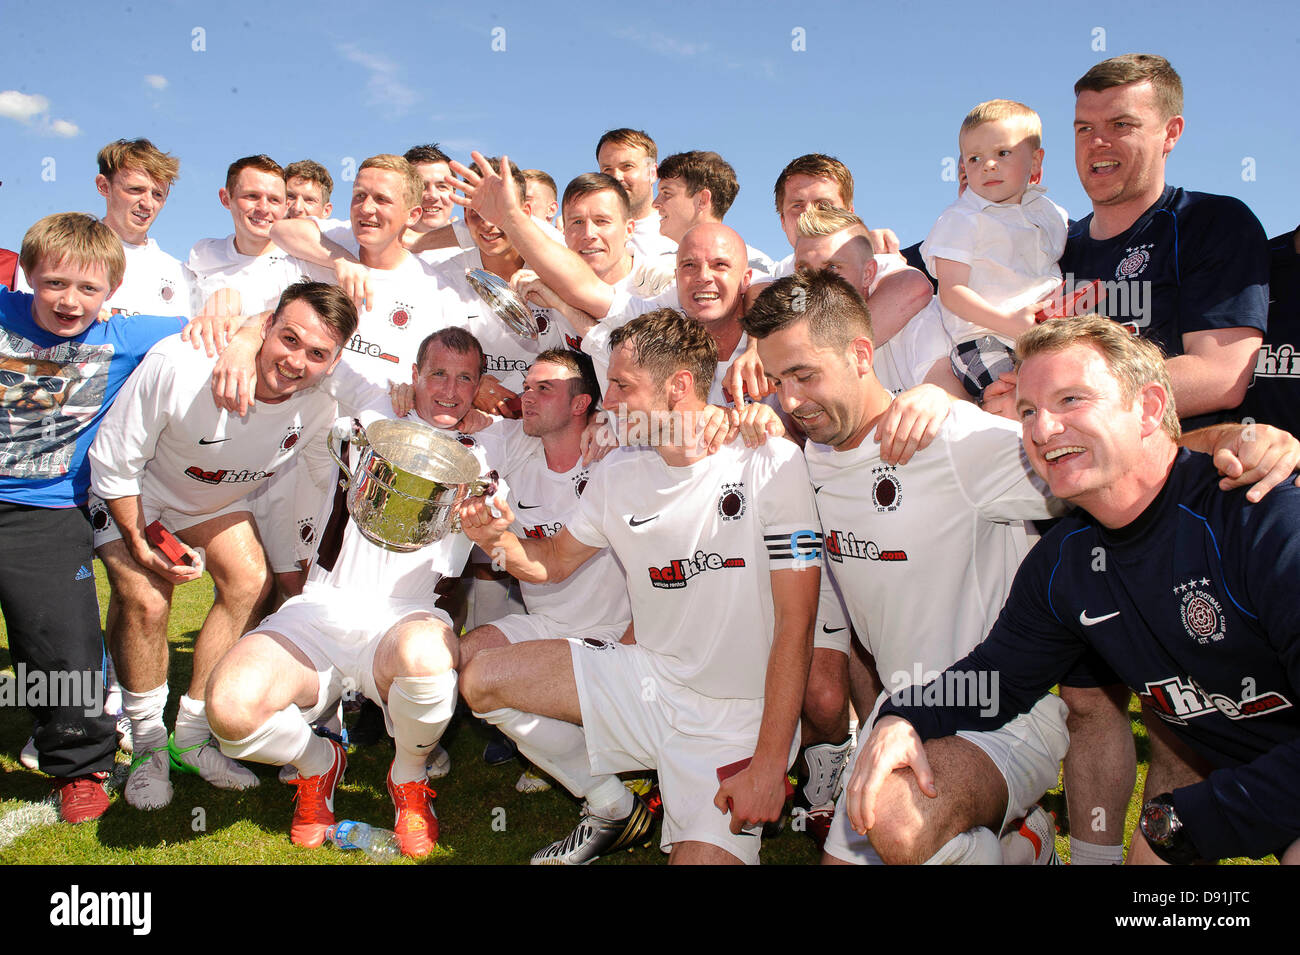 Bathgate, West Lothian, Scotland, UK. Wednesday 5th June 2013. Linlithgow celebrate lifting the Cup during the Fife & Lothians Cup Final, Linlithgow Rose v Camelon at Creamery Park, Bathgate. Credit: Colin Lunn Stock Photo